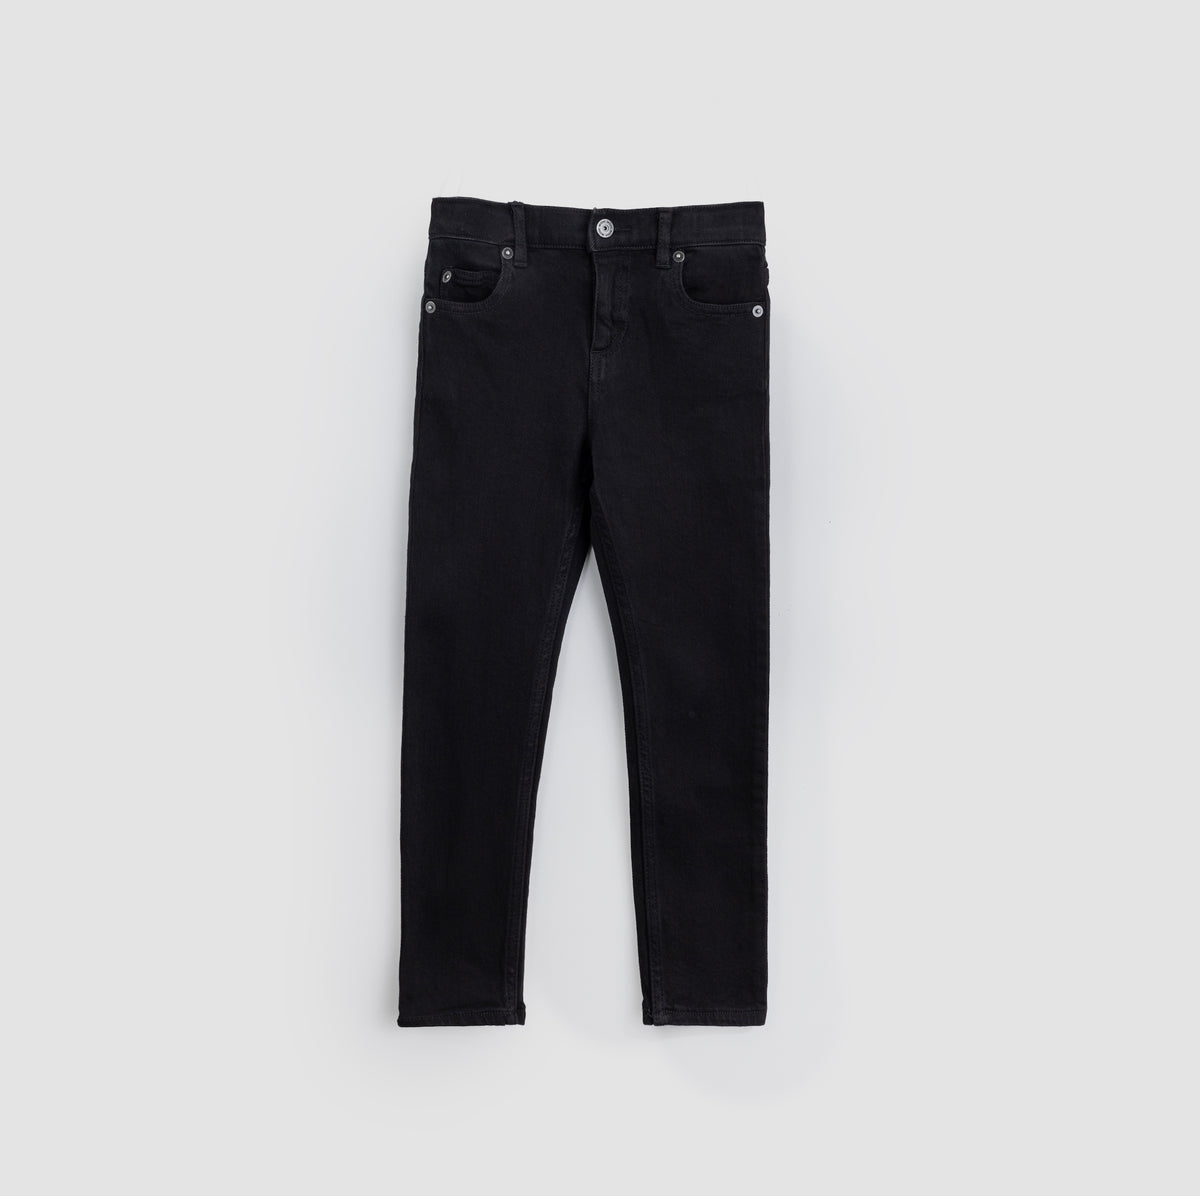 Black Stretch Jeans – miles the label